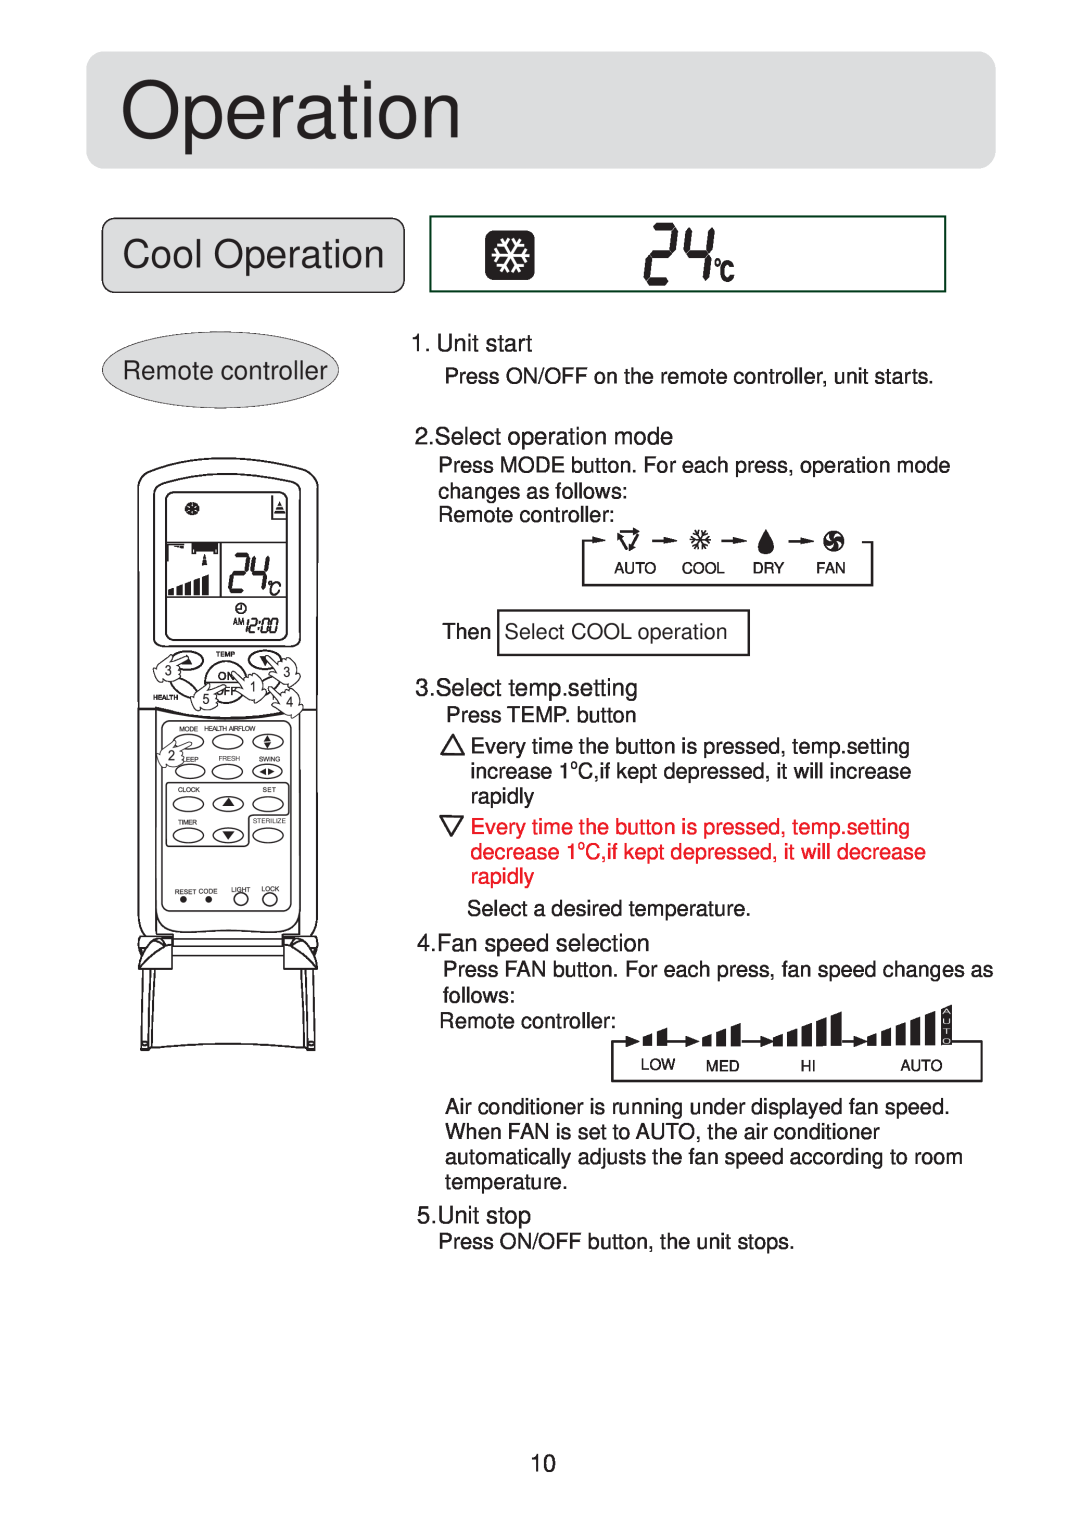 Haier 001050 Cool Operation, Remote controller, Unit start, Select operation mode, Select temp.setting, Unit stop 